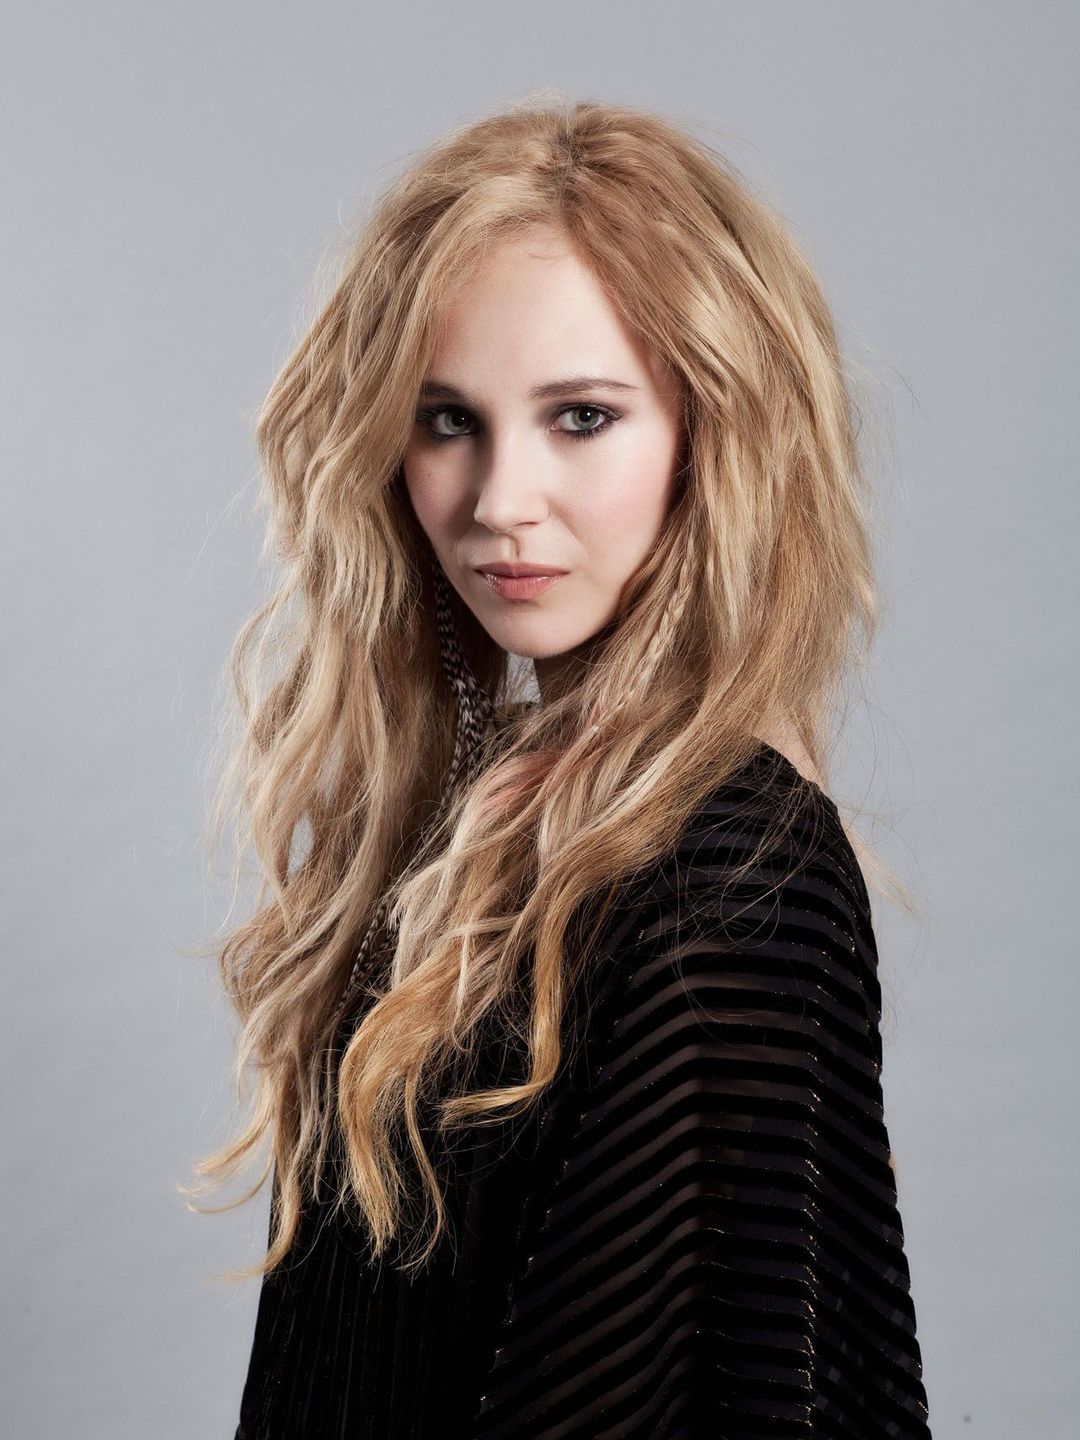 Juno Temple story of success